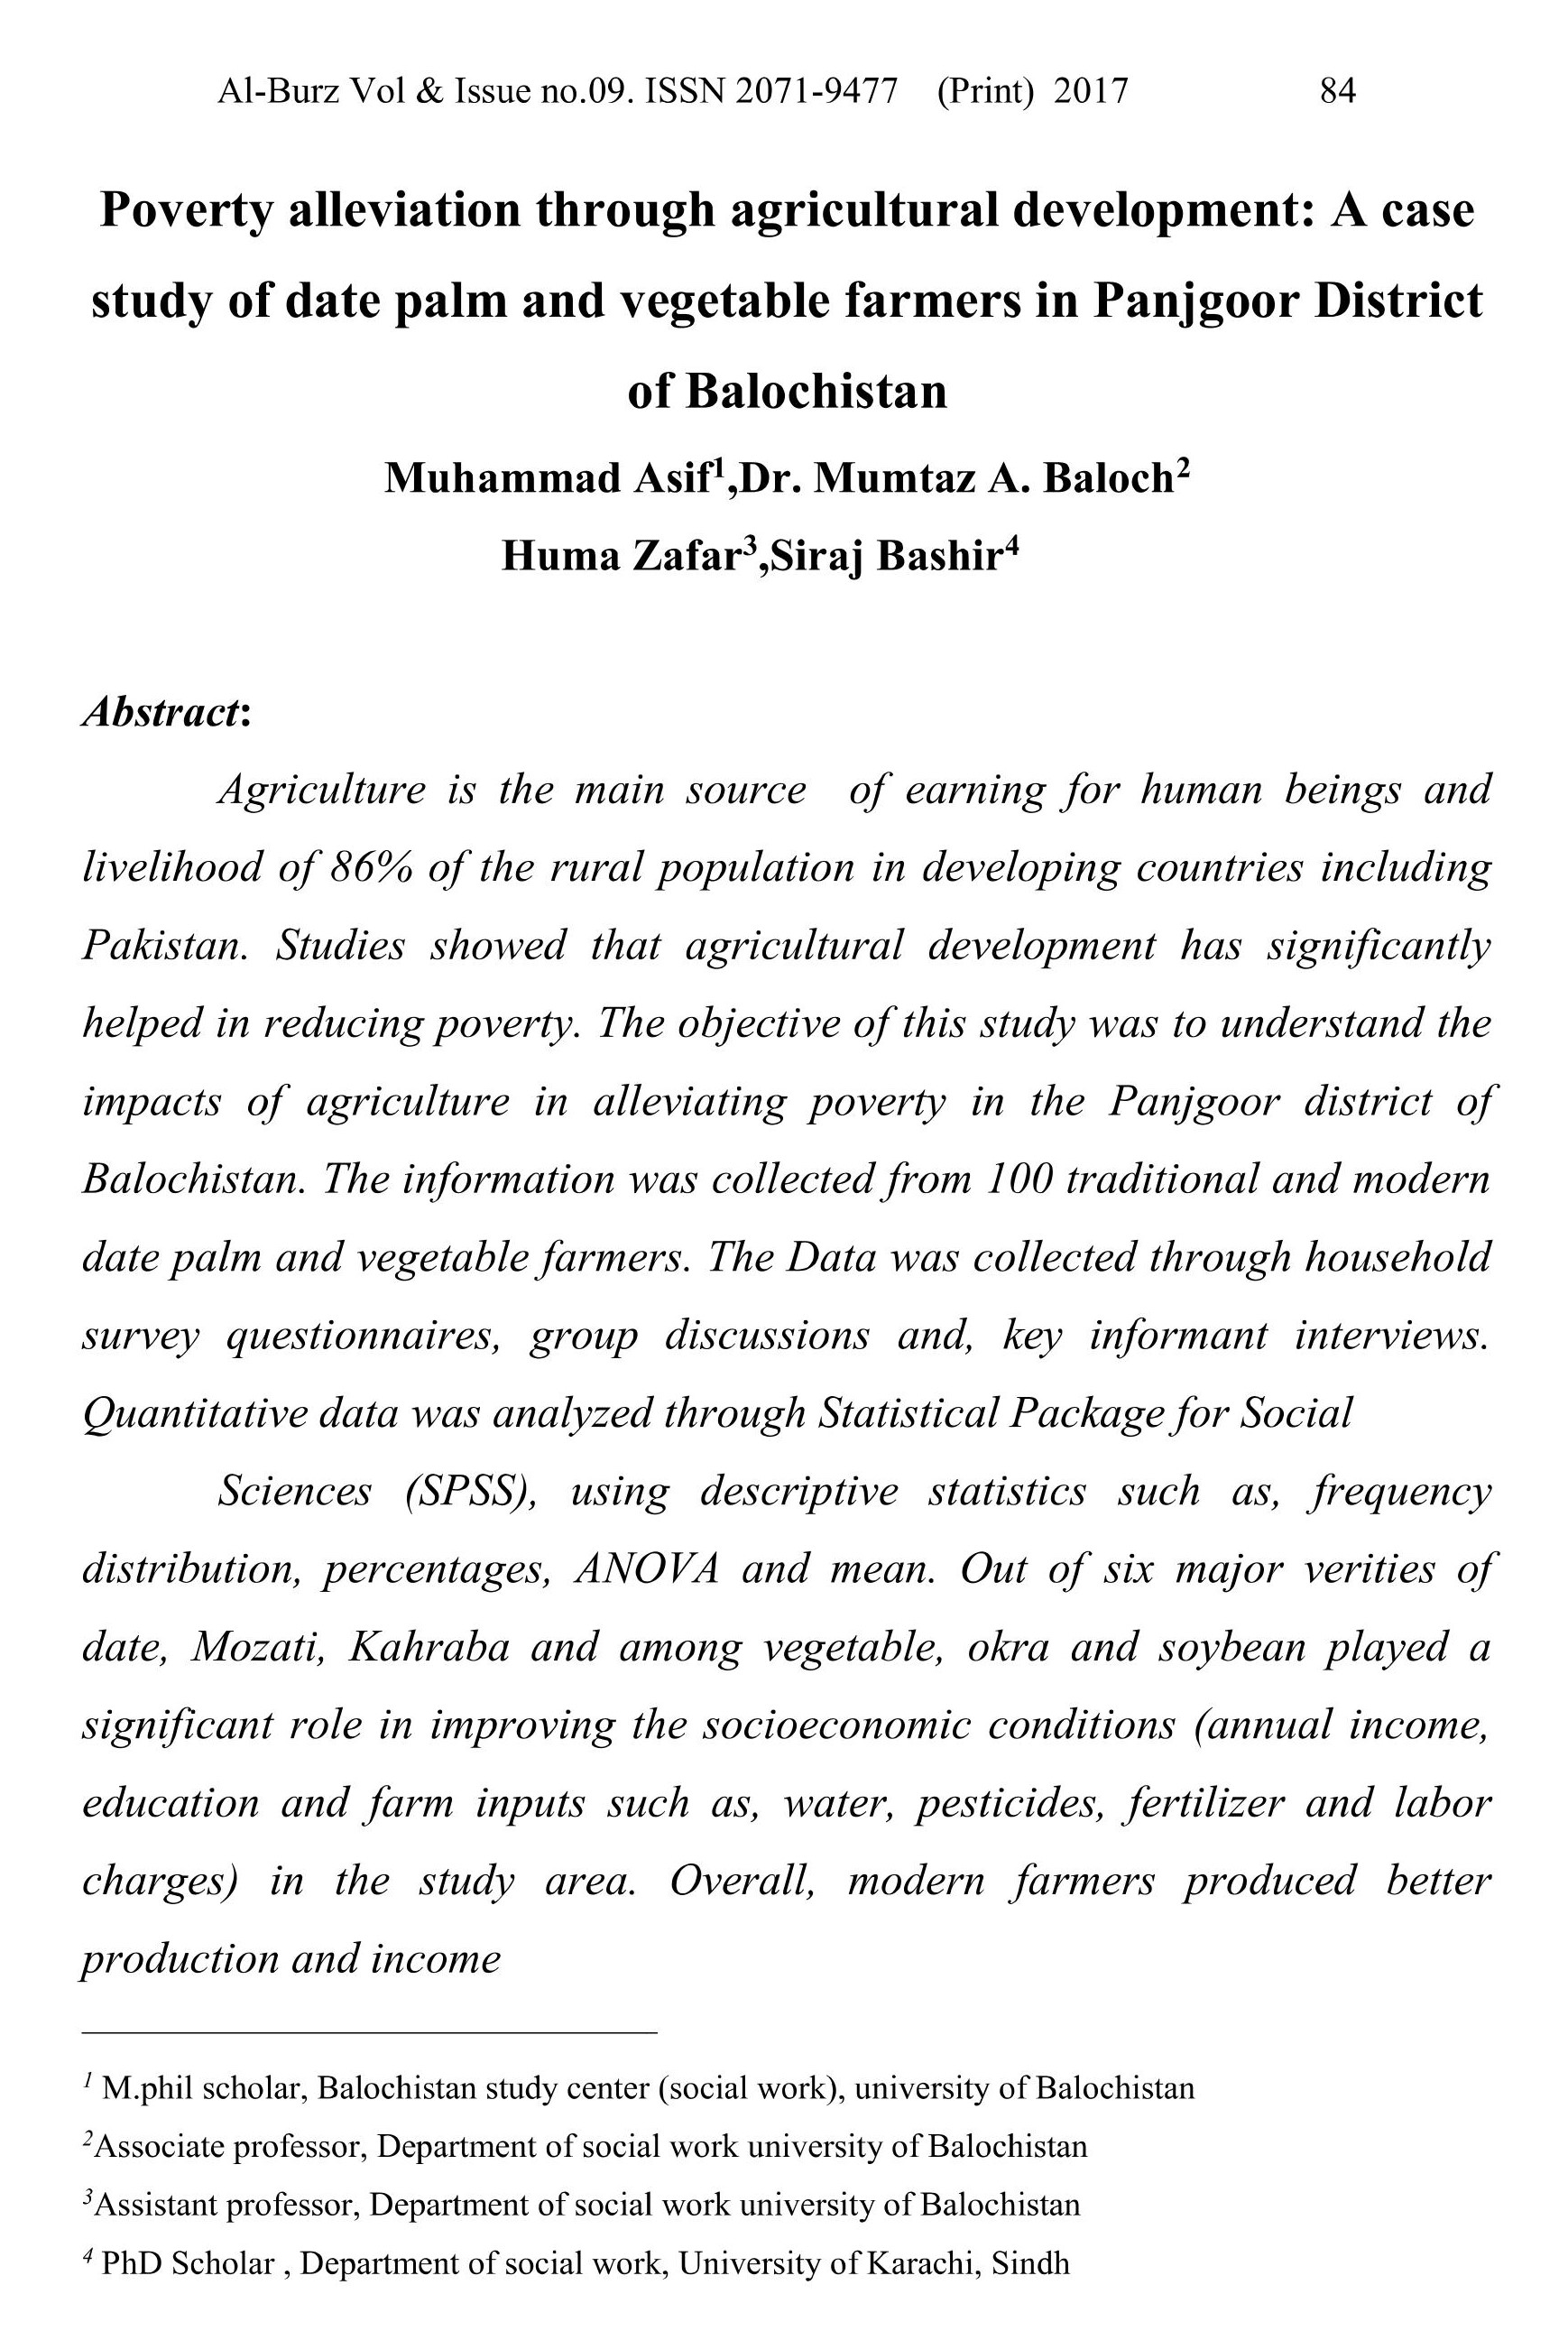 Poverty alleviation through agricultural development: A case study of date palm and vegetable farmers in Panjgoor District of Balochistan